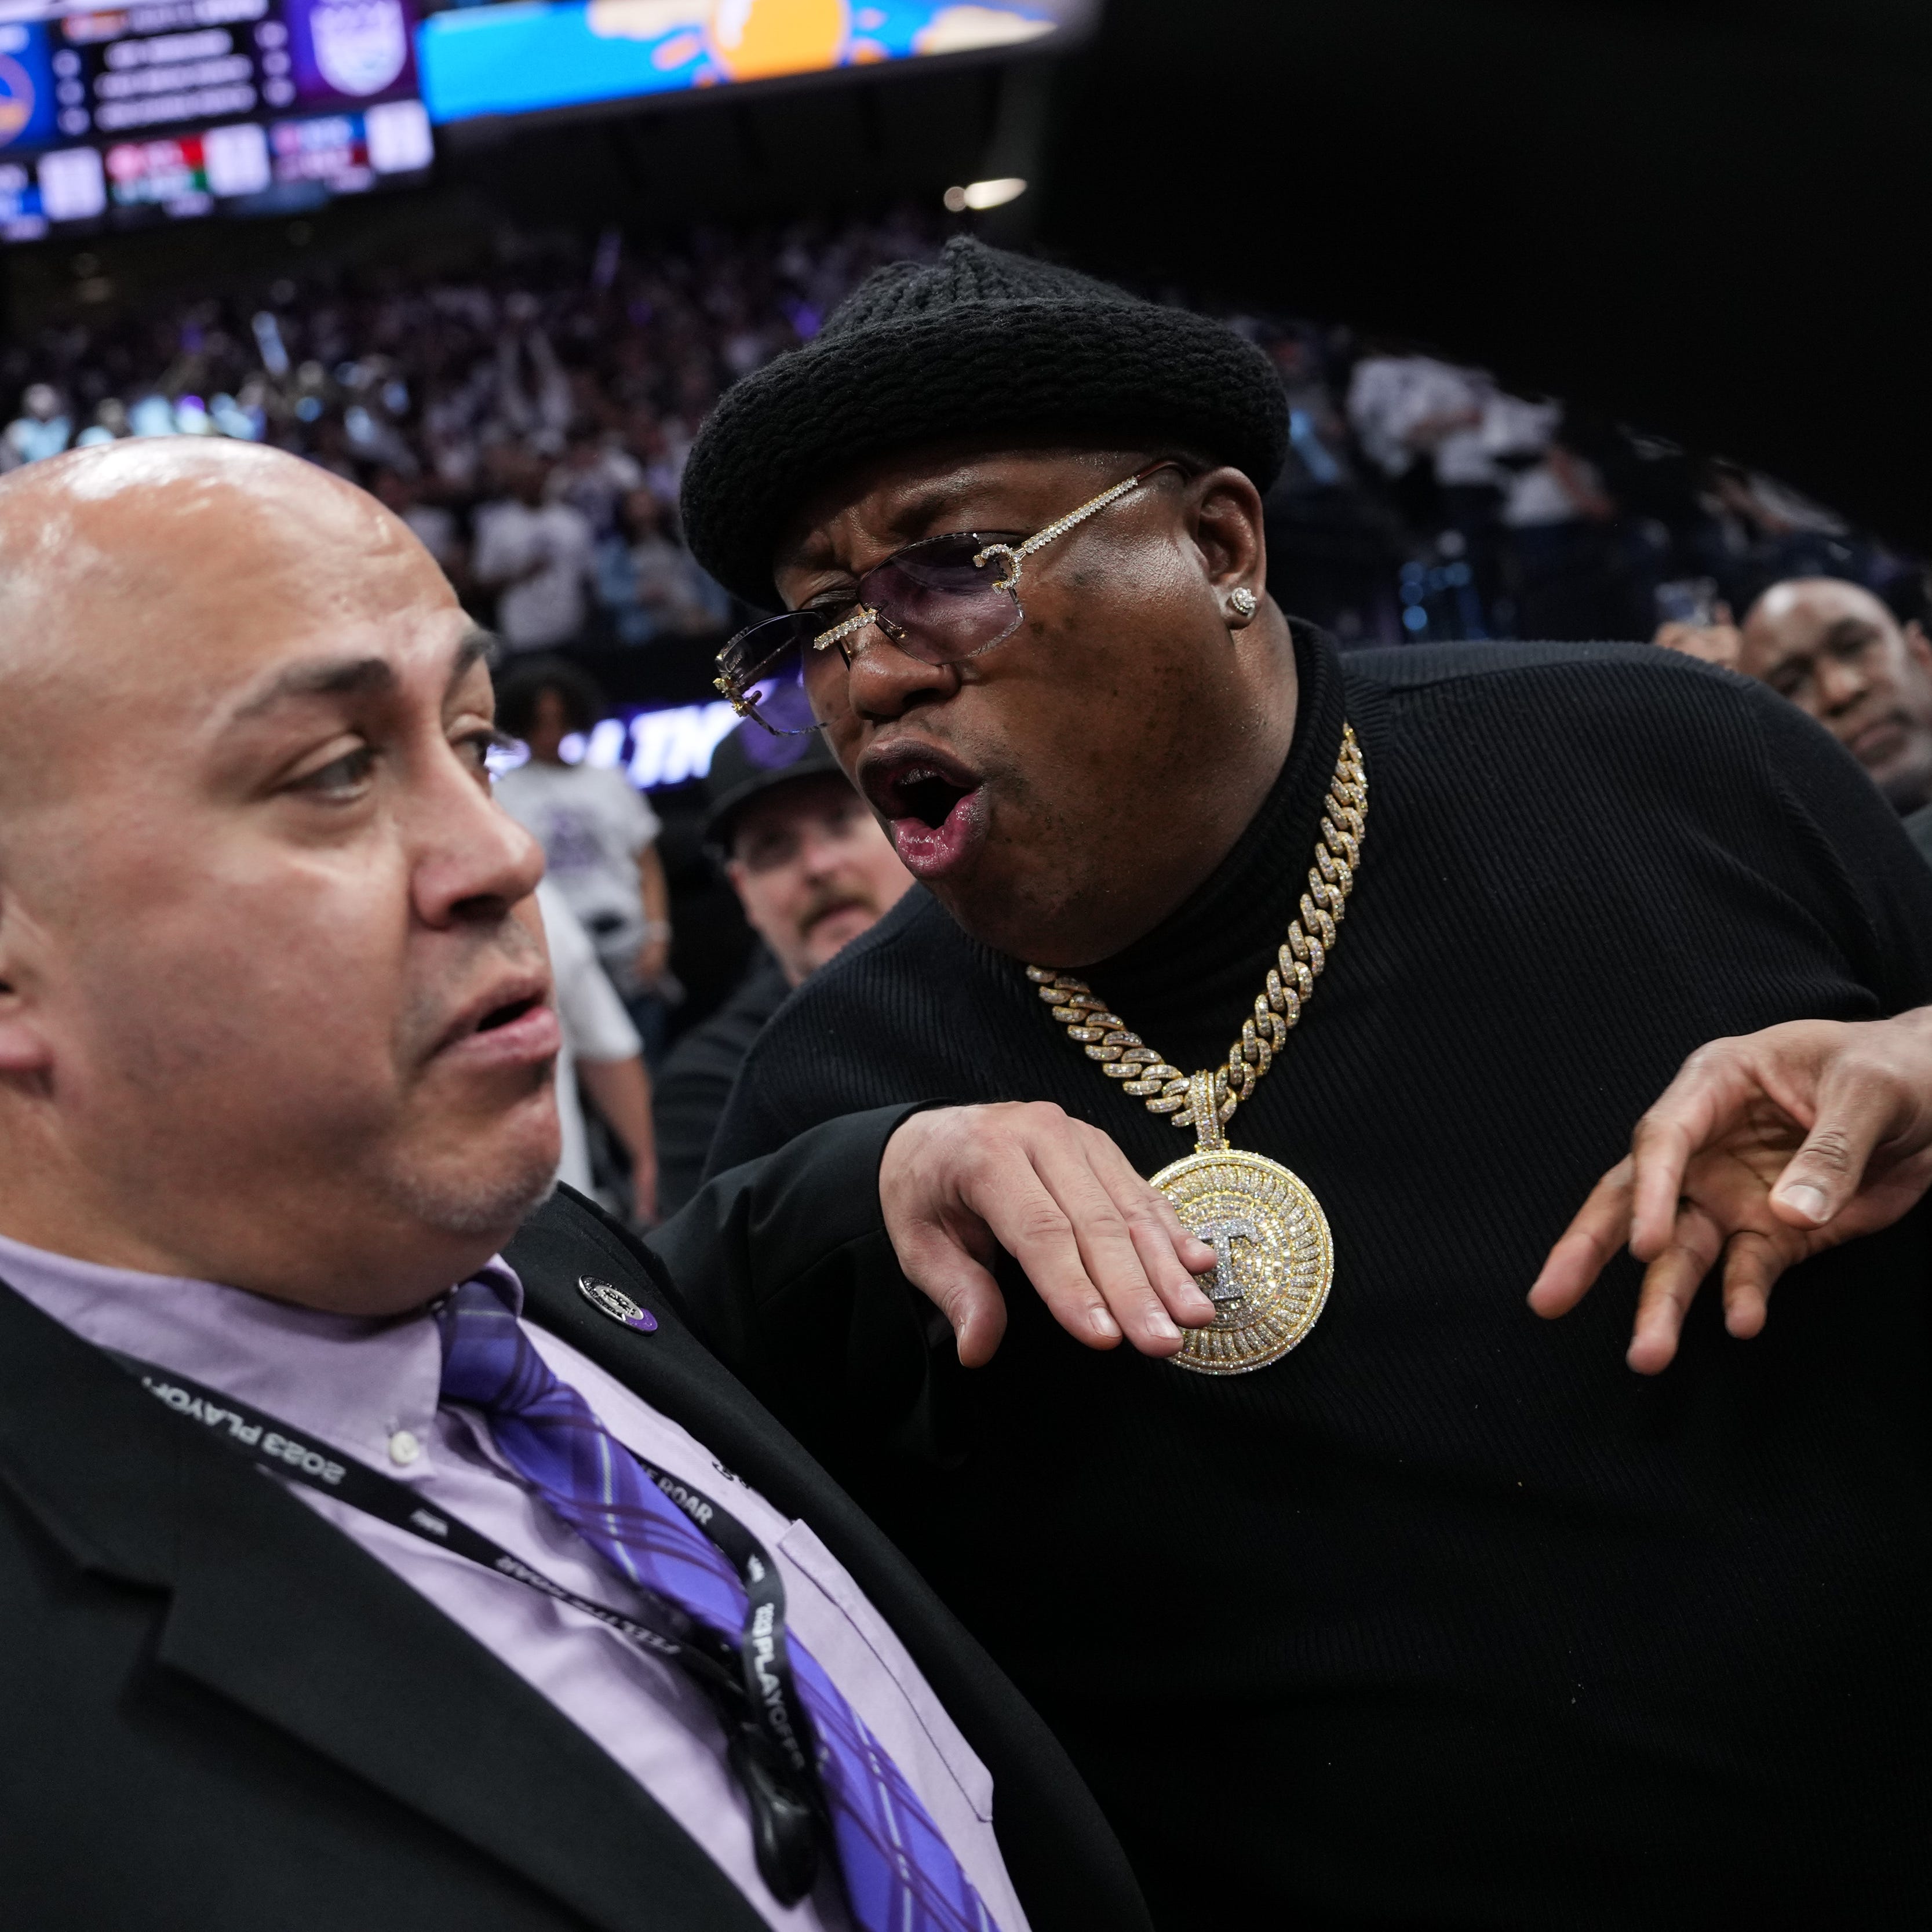 Rapper E-40 yells at arena security personnel before being escorted from courtside seating during Game 1 of the Western Conference First Round Playoffs between the Golden State Warriors and Sacramento Kings on April 15, 2023 in Sacramento, California.